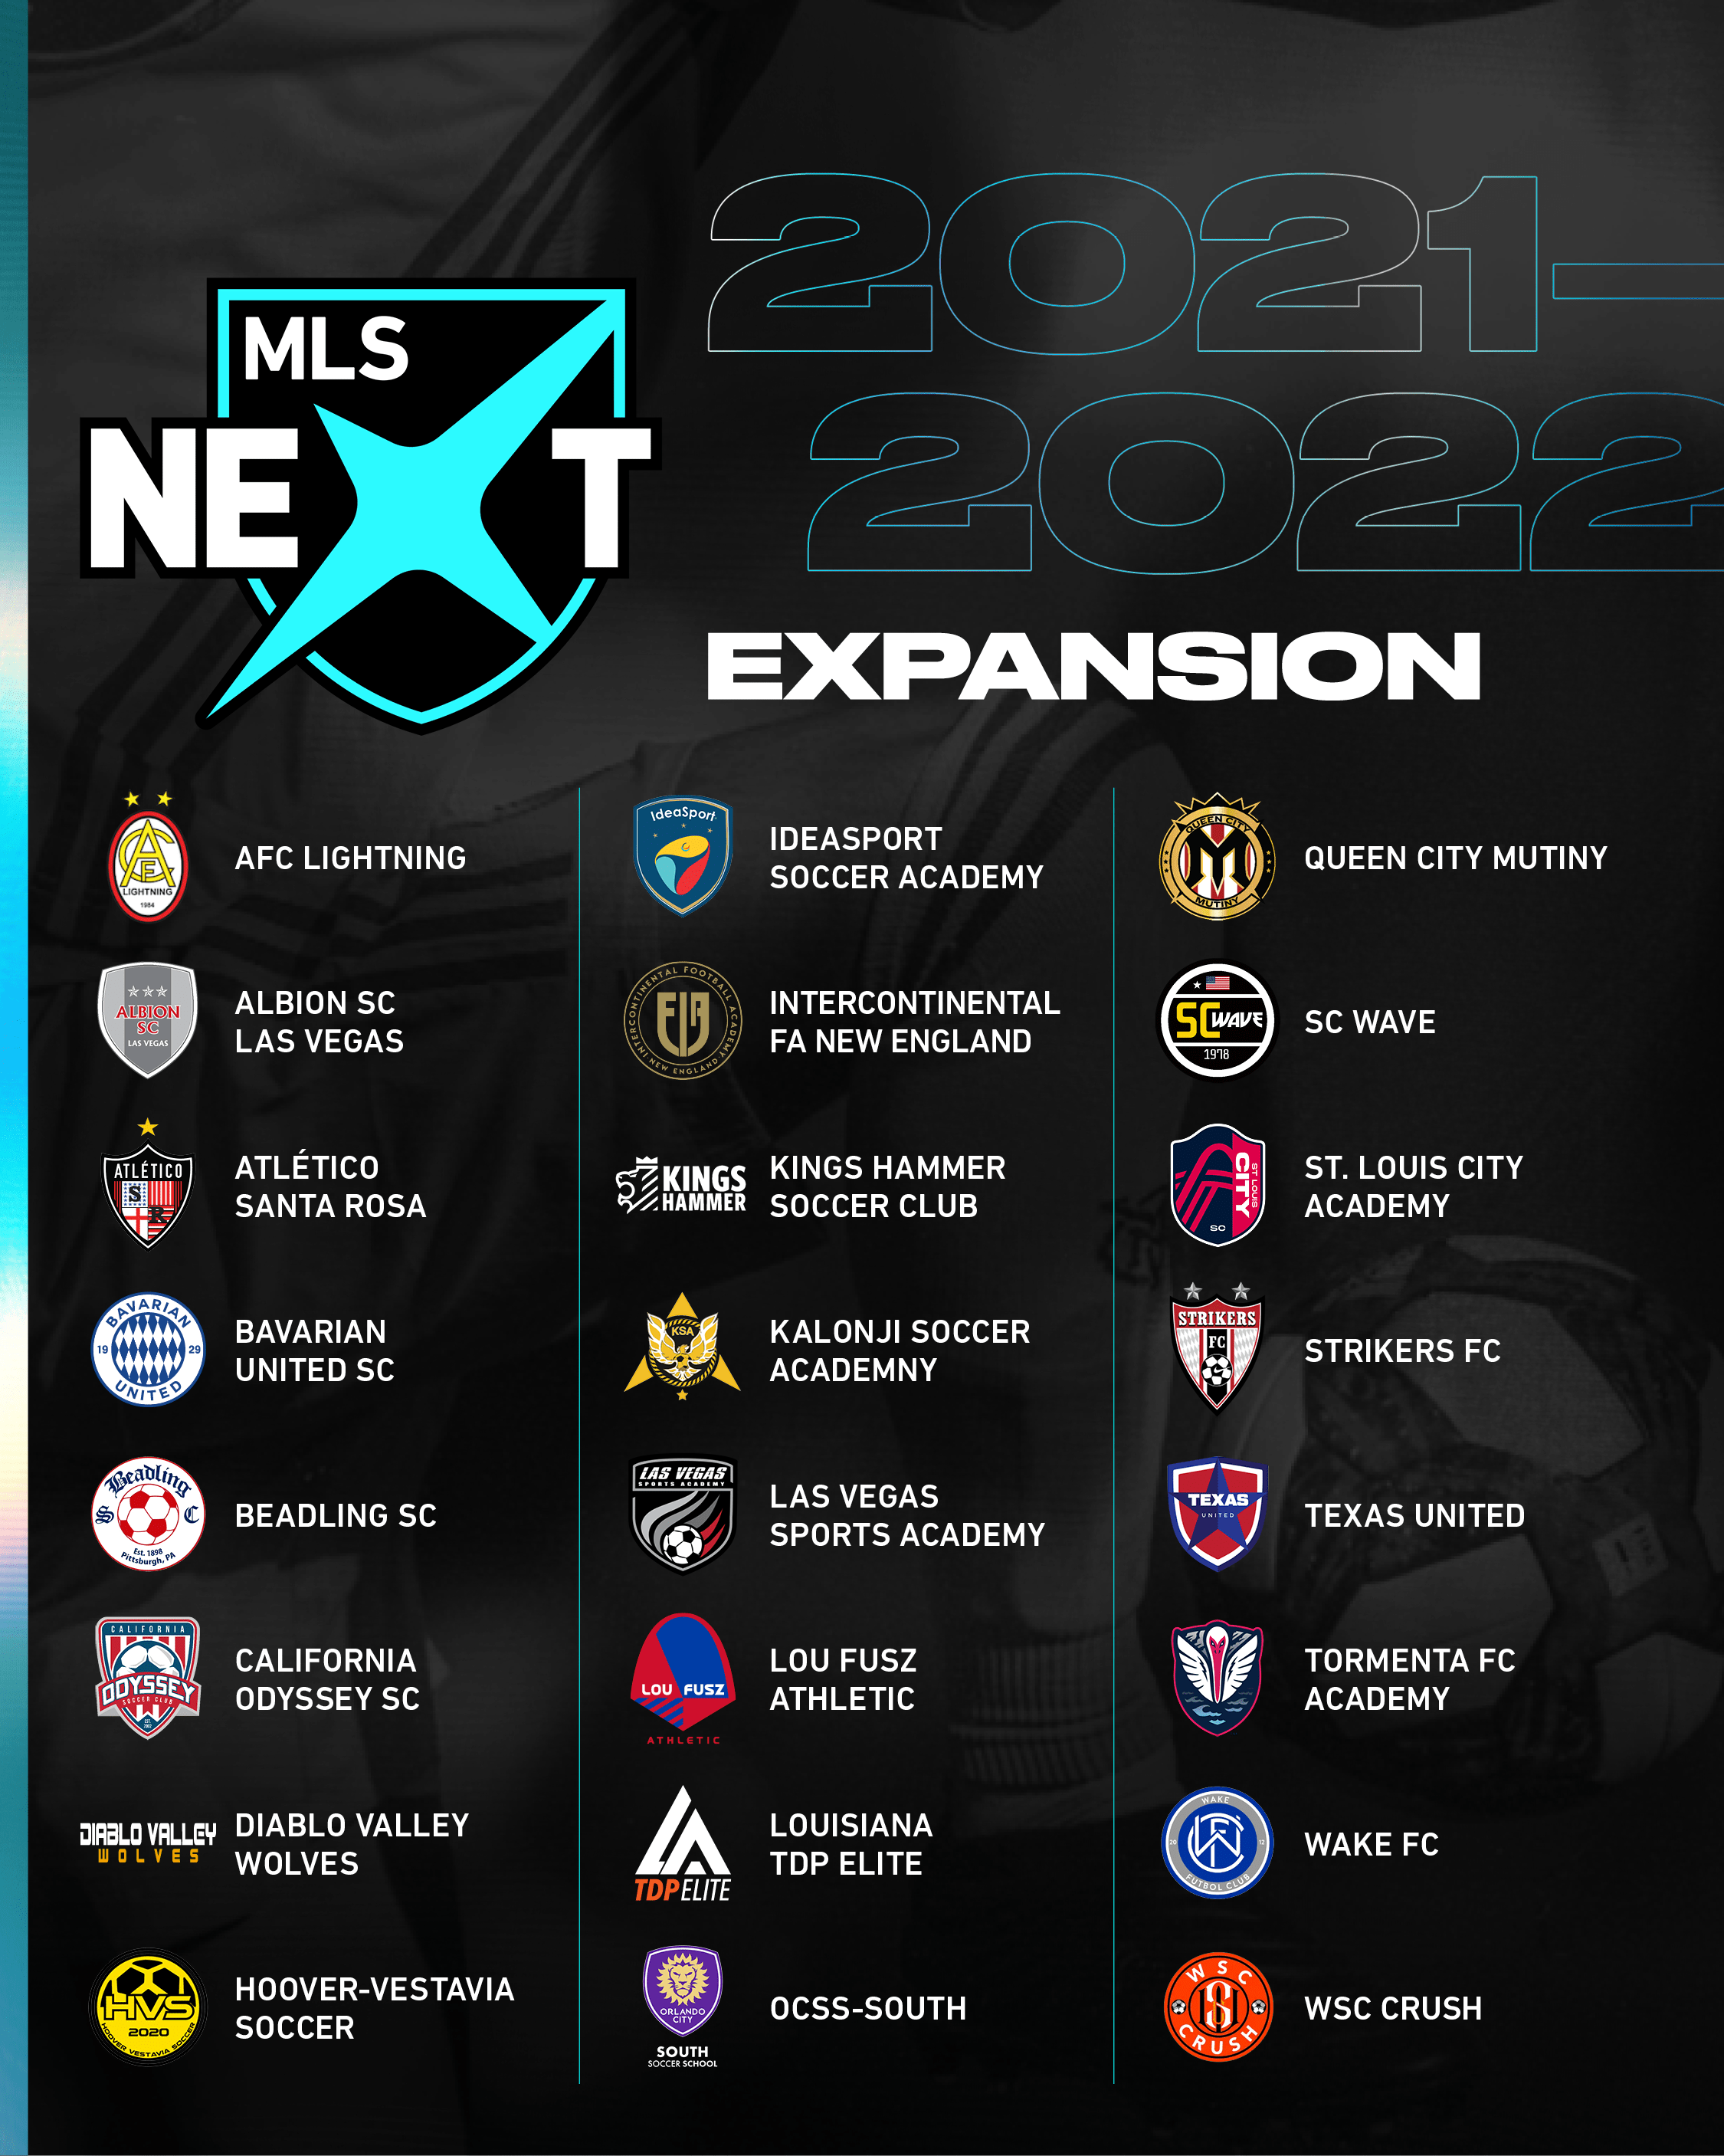 Mls Playoffs 2022 Schedule Mls Next Completes Strategic Expansion Ahead Of 2021-2022 Season |  Mlssoccer.com